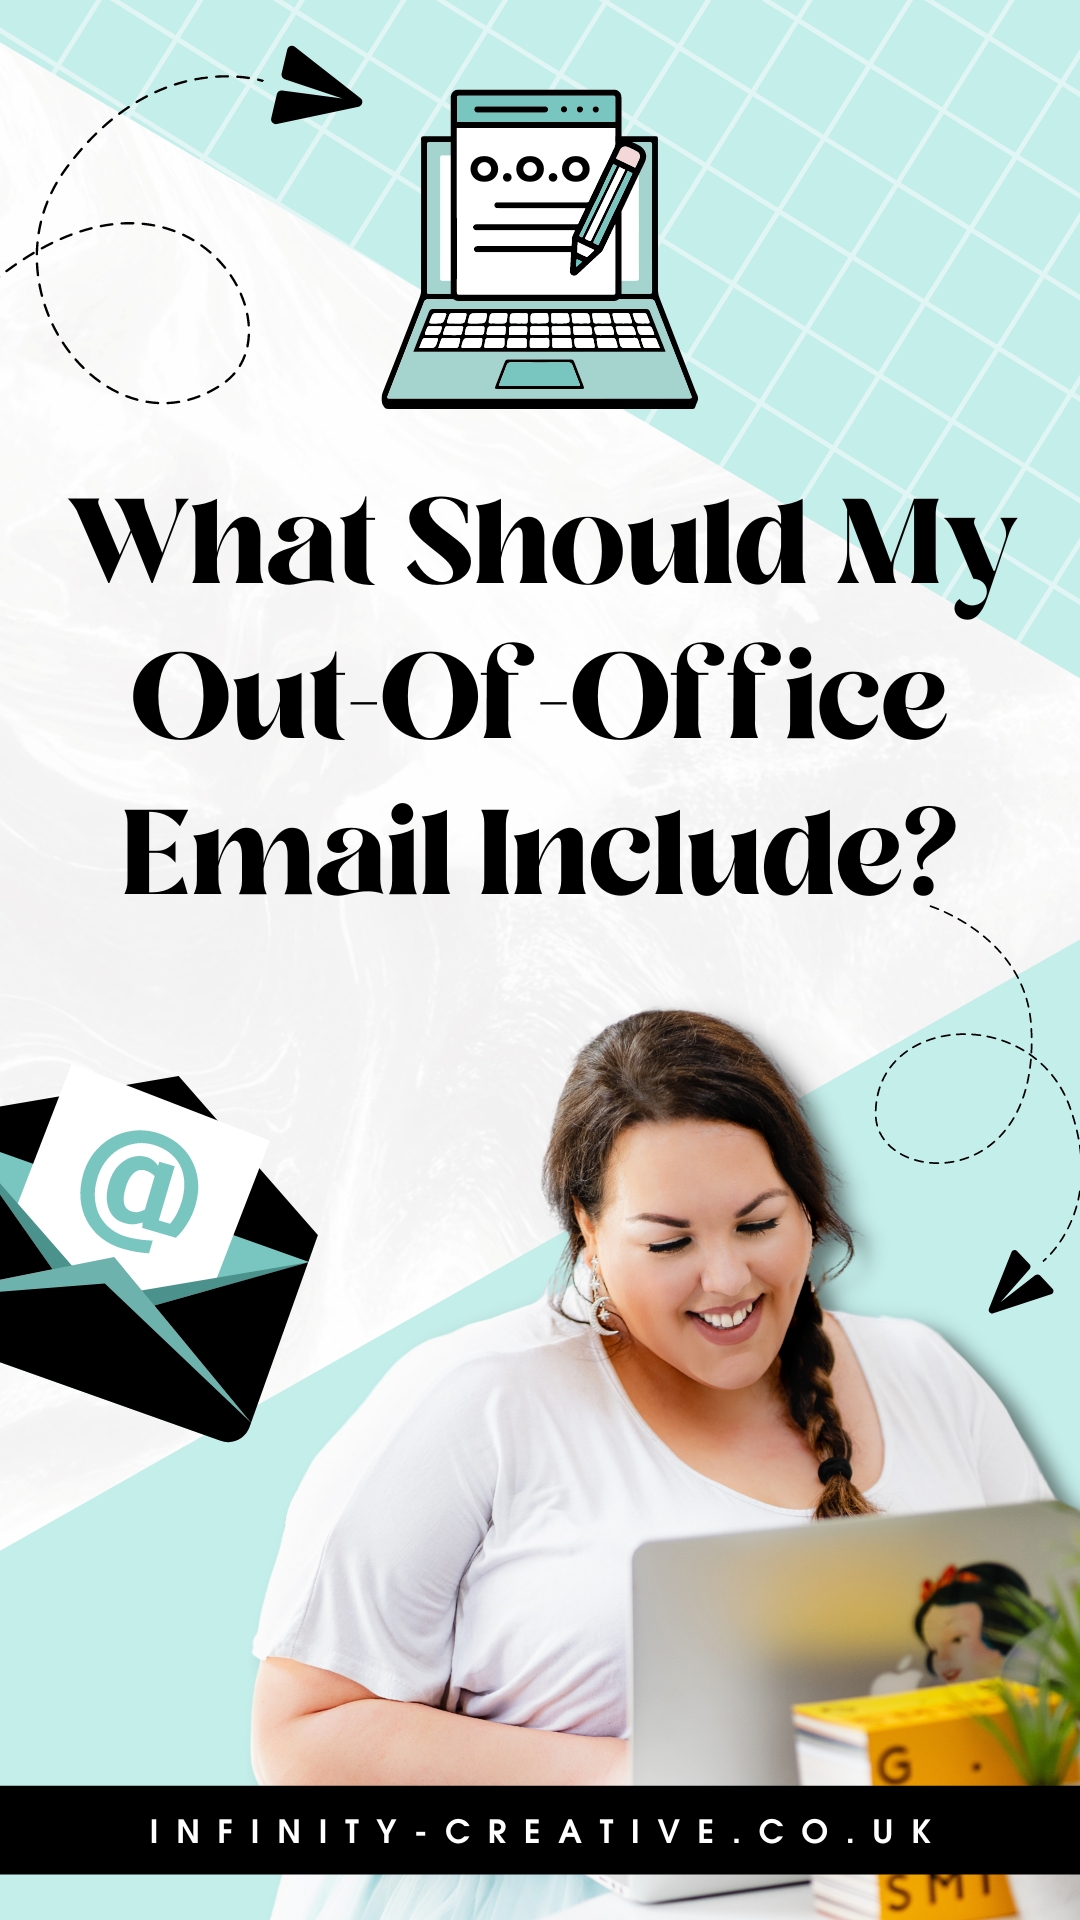 What Should My Out Of Office Email Include?